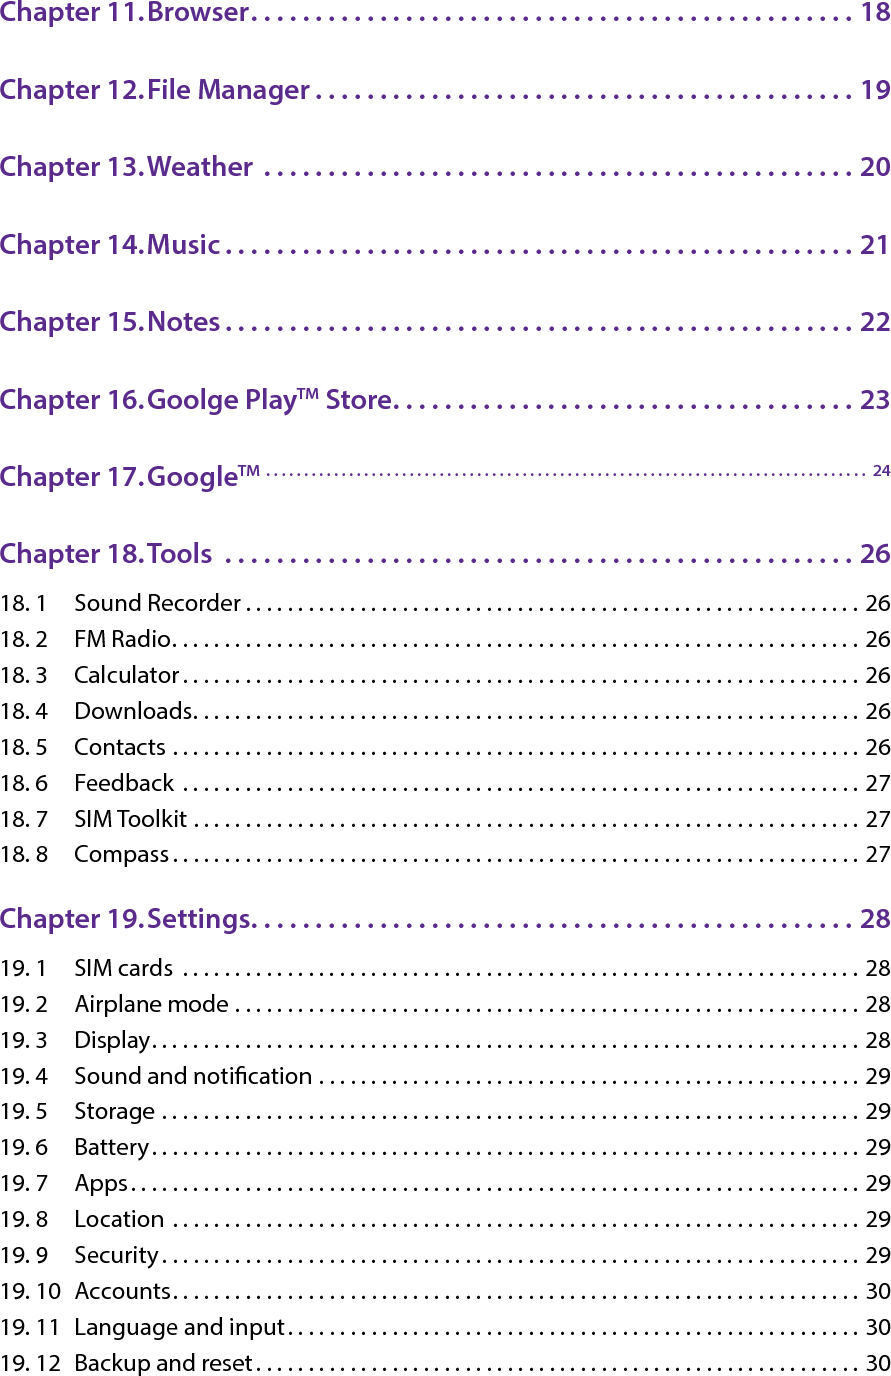 Chapter 11. Browser. . . . . . . . . . . . . . . . . . . . . . . . . . . . . . . . . . . . . . . . . . . . . . . 18Chapter 12. File Manager . . . . . . . . . . . . . . . . . . . . . . . . . . . . . . . . . . . . . . . . . . 19Chapter 13. Weather  . . . . . . . . . . . . . . . . . . . . . . . . . . . . . . . . . . . . . . . . . . . . . . 20Chapter 14. Music . . . . . . . . . . . . . . . . . . . . . . . . . . . . . . . . . . . . . . . . . . . . . . . . . 21Chapter 15. Notes . . . . . . . . . . . . . . . . . . . . . . . . . . . . . . . . . . . . . . . . . . . . . . . . . 22Chapter 16. Goolge PlayTM Store. . . . . . . . . . . . . . . . . . . . . . . . . . . . . . . . . . . . 23Chapter 17. GoogleTM  . . . . . . . . . . . . . . . . . . . . . . . . . . . . . . . . . . . . . . . . . . . . . . . . . . . . . . . . . . . . . . . . . . . . . . . . . . . . . . . .  24Chapter 18. Tools  . . . . . . . . . . . . . . . . . . . . . . . . . . . . . . . . . . . . . . . . . . . . . . . . . 2618. 1  Sound Recorder . . . . . . . . . . . . . . . . . . . . . . . . . . . . . . . . . . . . . . . . . . . . . . . . . . . . . . . . . . . 2618. 2  FM Radio. . . . . . . . . . . . . . . . . . . . . . . . . . . . . . . . . . . . . . . . . . . . . . . . . . . . . . . . . . . . . . . . . . 2618. 3  Calculator . . . . . . . . . . . . . . . . . . . . . . . . . . . . . . . . . . . . . . . . . . . . . . . . . . . . . . . . . . . . . . . . . 2618. 4  Downloads. . . . . . . . . . . . . . . . . . . . . . . . . . . . . . . . . . . . . . . . . . . . . . . . . . . . . . . . . . . . . . . . 2618. 5  Contacts  . . . . . . . . . . . . . . . . . . . . . . . . . . . . . . . . . . . . . . . . . . . . . . . . . . . . . . . . . . . . . . . . . . 2618. 6  Feedback  . . . . . . . . . . . . . . . . . . . . . . . . . . . . . . . . . . . . . . . . . . . . . . . . . . . . . . . . . . . . . . . . . 2718. 7  SIM Toolkit  . . . . . . . . . . . . . . . . . . . . . . . . . . . . . . . . . . . . . . . . . . . . . . . . . . . . . . . . . . . . . . . . 2718. 8  Compass. . . . . . . . . . . . . . . . . . . . . . . . . . . . . . . . . . . . . . . . . . . . . . . . . . . . . . . . . . . . . . . . . . 27Chapter 19. Settings. . . . . . . . . . . . . . . . . . . . . . . . . . . . . . . . . . . . . . . . . . . . . . . 2819. 1  SIM cards  . . . . . . . . . . . . . . . . . . . . . . . . . . . . . . . . . . . . . . . . . . . . . . . . . . . . . . . . . . . . . . . . . 2819. 2  Airplane mode  . . . . . . . . . . . . . . . . . . . . . . . . . . . . . . . . . . . . . . . . . . . . . . . . . . . . . . . . . . . . 2819. 3  Display. . . . . . . . . . . . . . . . . . . . . . . . . . . . . . . . . . . . . . . . . . . . . . . . . . . . . . . . . . . . . . . . . . . . 2819. 4  Sound and notication  . . . . . . . . . . . . . . . . . . . . . . . . . . . . . . . . . . . . . . . . . . . . . . . . . . . . 2919. 5  Storage  . . . . . . . . . . . . . . . . . . . . . . . . . . . . . . . . . . . . . . . . . . . . . . . . . . . . . . . . . . . . . . . . . . . 2919. 6  Battery. . . . . . . . . . . . . . . . . . . . . . . . . . . . . . . . . . . . . . . . . . . . . . . . . . . . . . . . . . . . . . . . . . . . 2919. 7  Apps. . . . . . . . . . . . . . . . . . . . . . . . . . . . . . . . . . . . . . . . . . . . . . . . . . . . . . . . . . . . . . . . . . . . . . 2919. 8  Location  . . . . . . . . . . . . . . . . . . . . . . . . . . . . . . . . . . . . . . . . . . . . . . . . . . . . . . . . . . . . . . . . . . 2919. 9  Security . . . . . . . . . . . . . . . . . . . . . . . . . . . . . . . . . . . . . . . . . . . . . . . . . . . . . . . . . . . . . . . . . . . 2919. 10  Accounts. . . . . . . . . . . . . . . . . . . . . . . . . . . . . . . . . . . . . . . . . . . . . . . . . . . . . . . . . . . . . . . . . . 3019. 11  Language and input. . . . . . . . . . . . . . . . . . . . . . . . . . . . . . . . . . . . . . . . . . . . . . . . . . . . . . . 3019. 12  Backup and reset . . . . . . . . . . . . . . . . . . . . . . . . . . . . . . . . . . . . . . . . . . . . . . . . . . . . . . . . . . 30